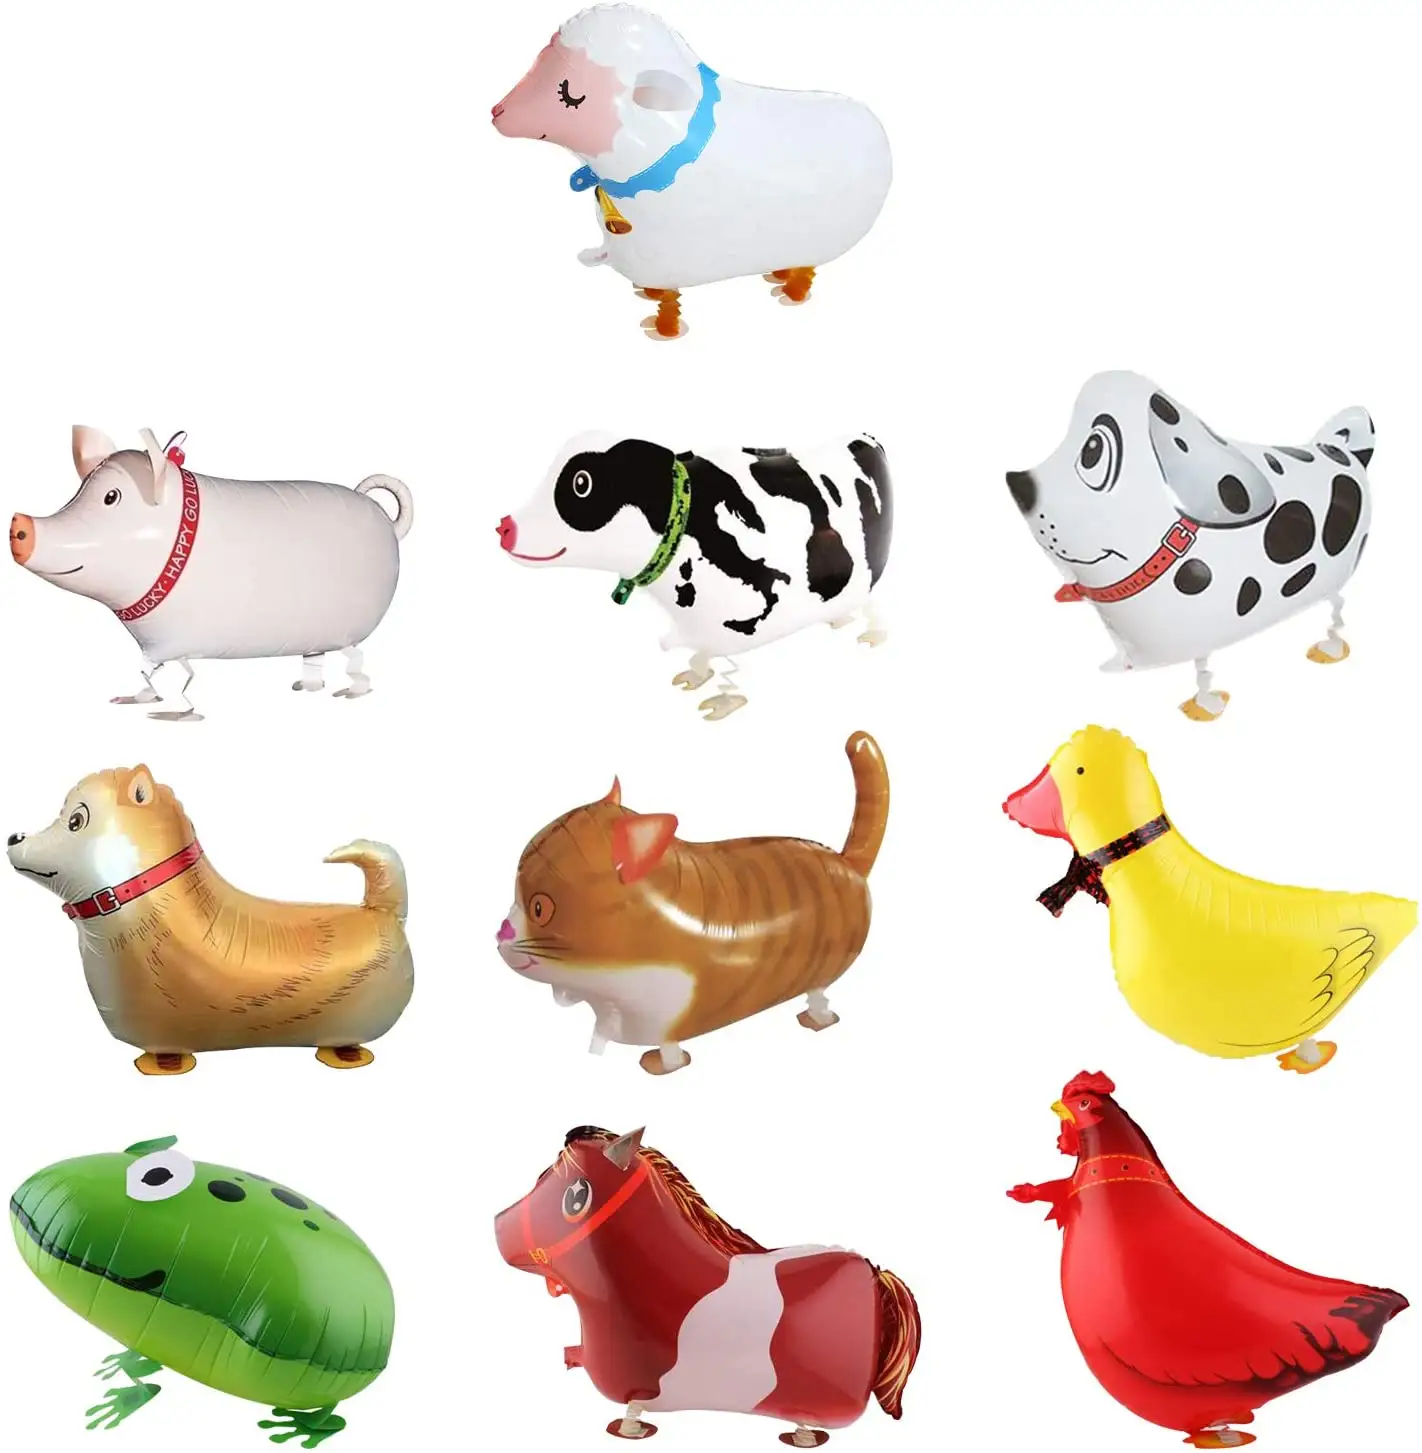 Farm Walking Animal Balloons Birthday Party Decor Pony Duck Rooster Cow Pig Sheep Spotted Dog Frog Cat